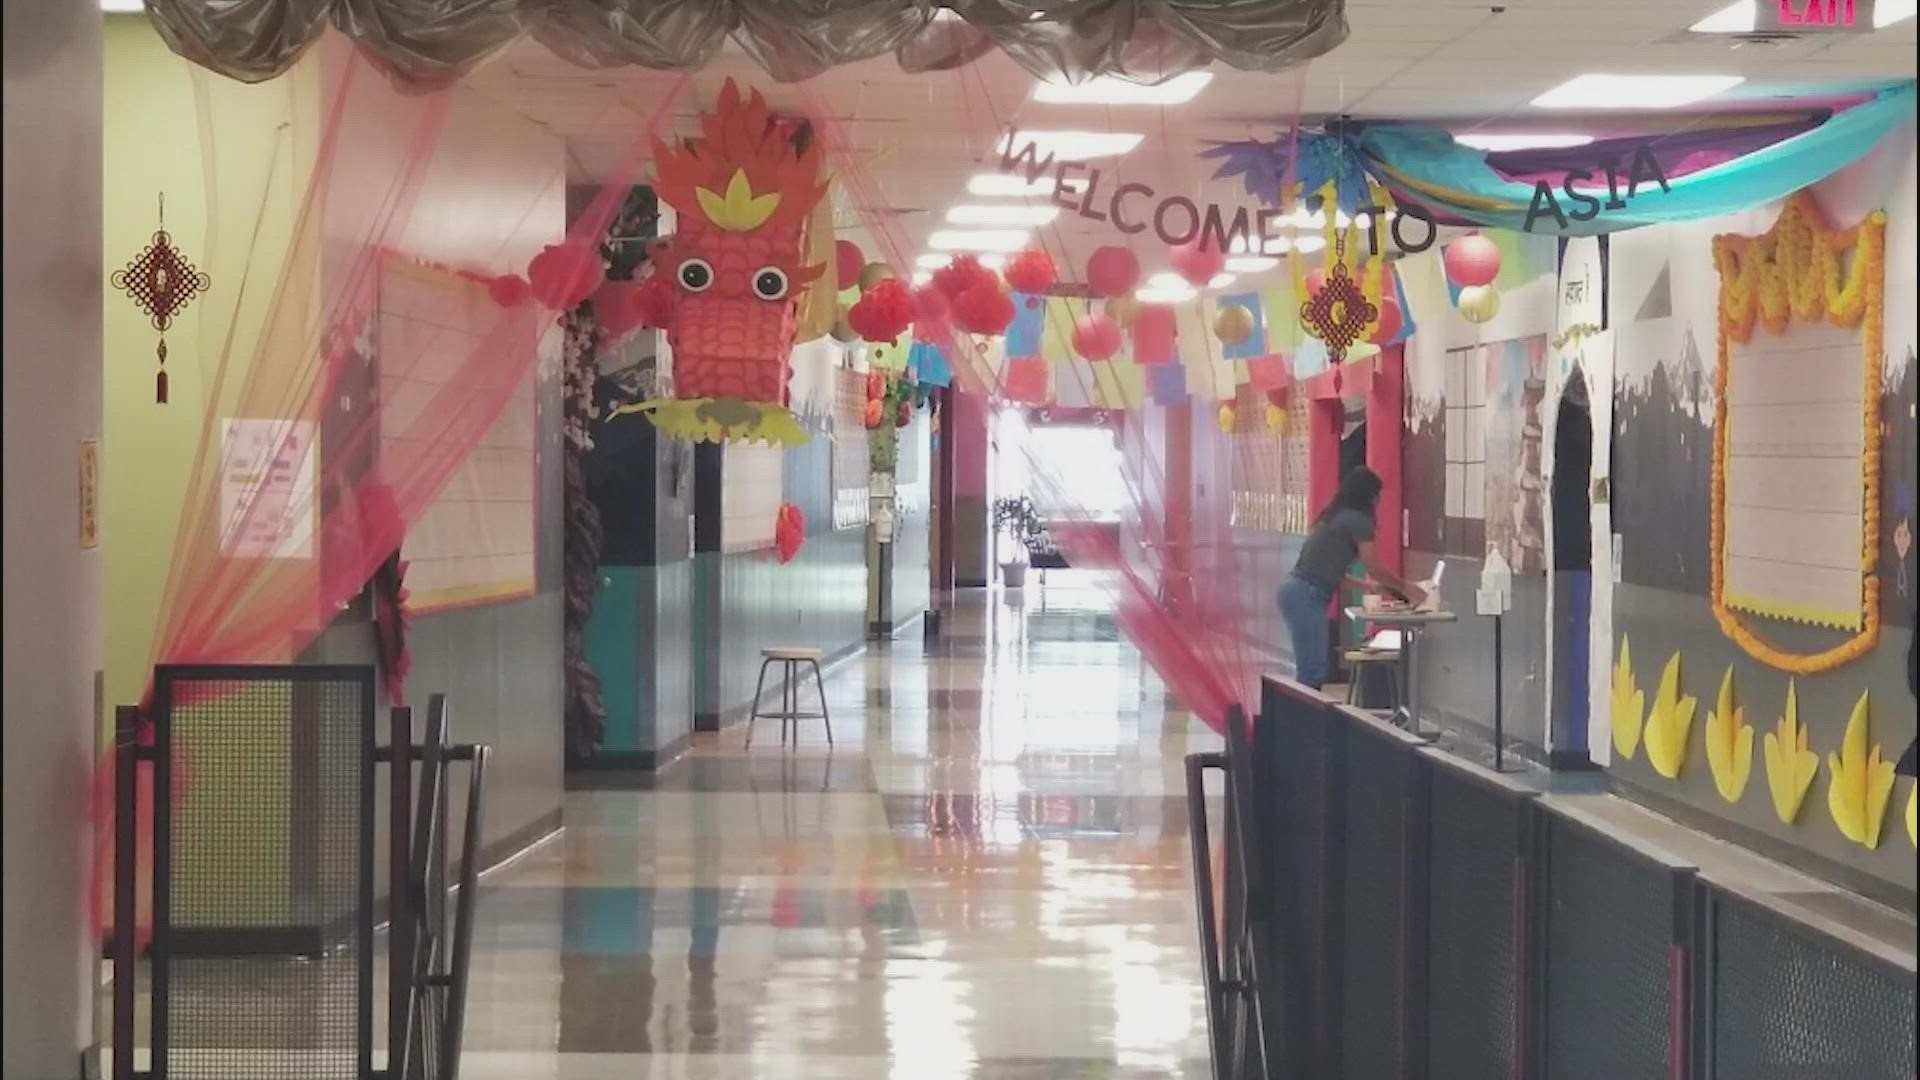 Staff at Jack Lowe, Sr. Elementary school are using elaborate, global-themed decorations to welcome students back for the 2021-2022 school year.